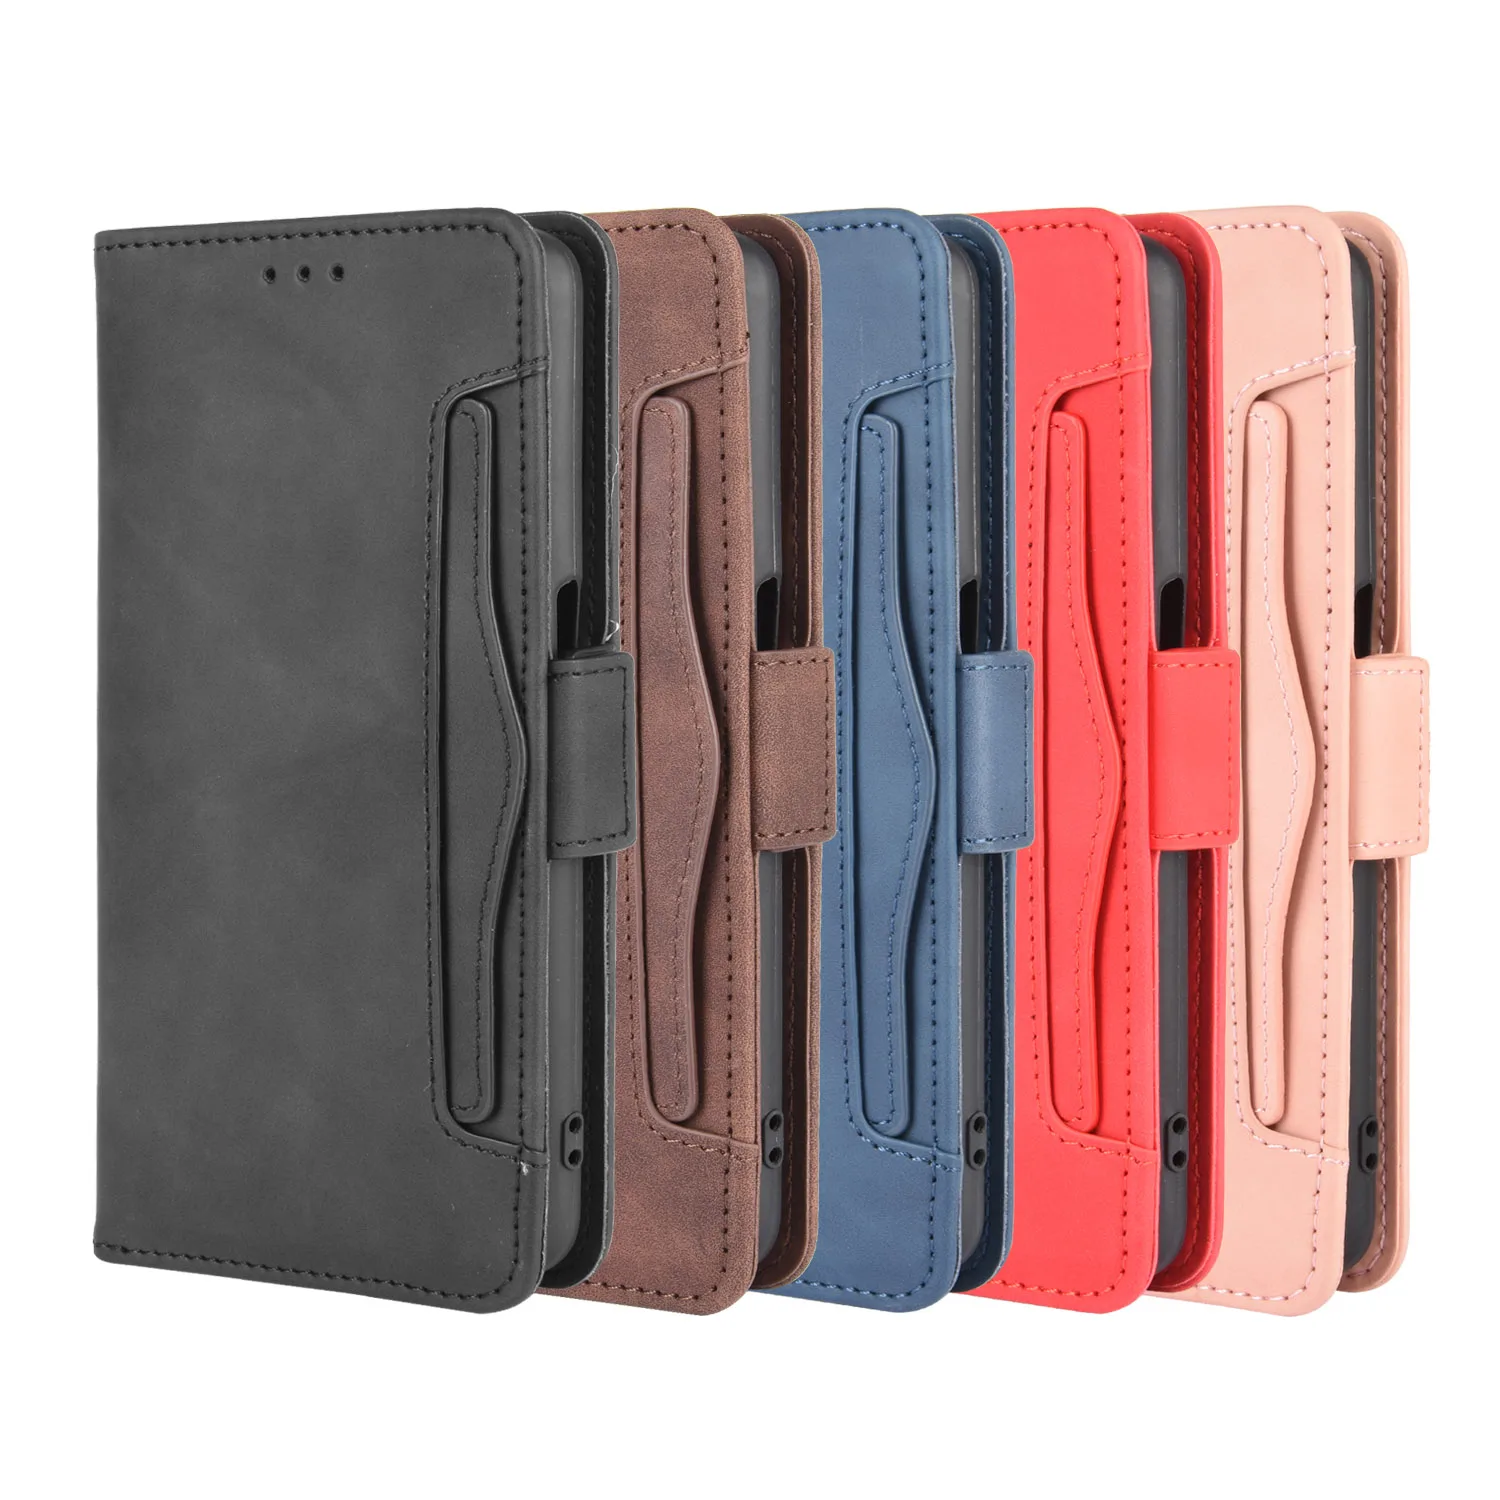 

For DOOGEE N20 / Y9 Plus PU Leather Protection Card Slots Wallet Case Flip Cover